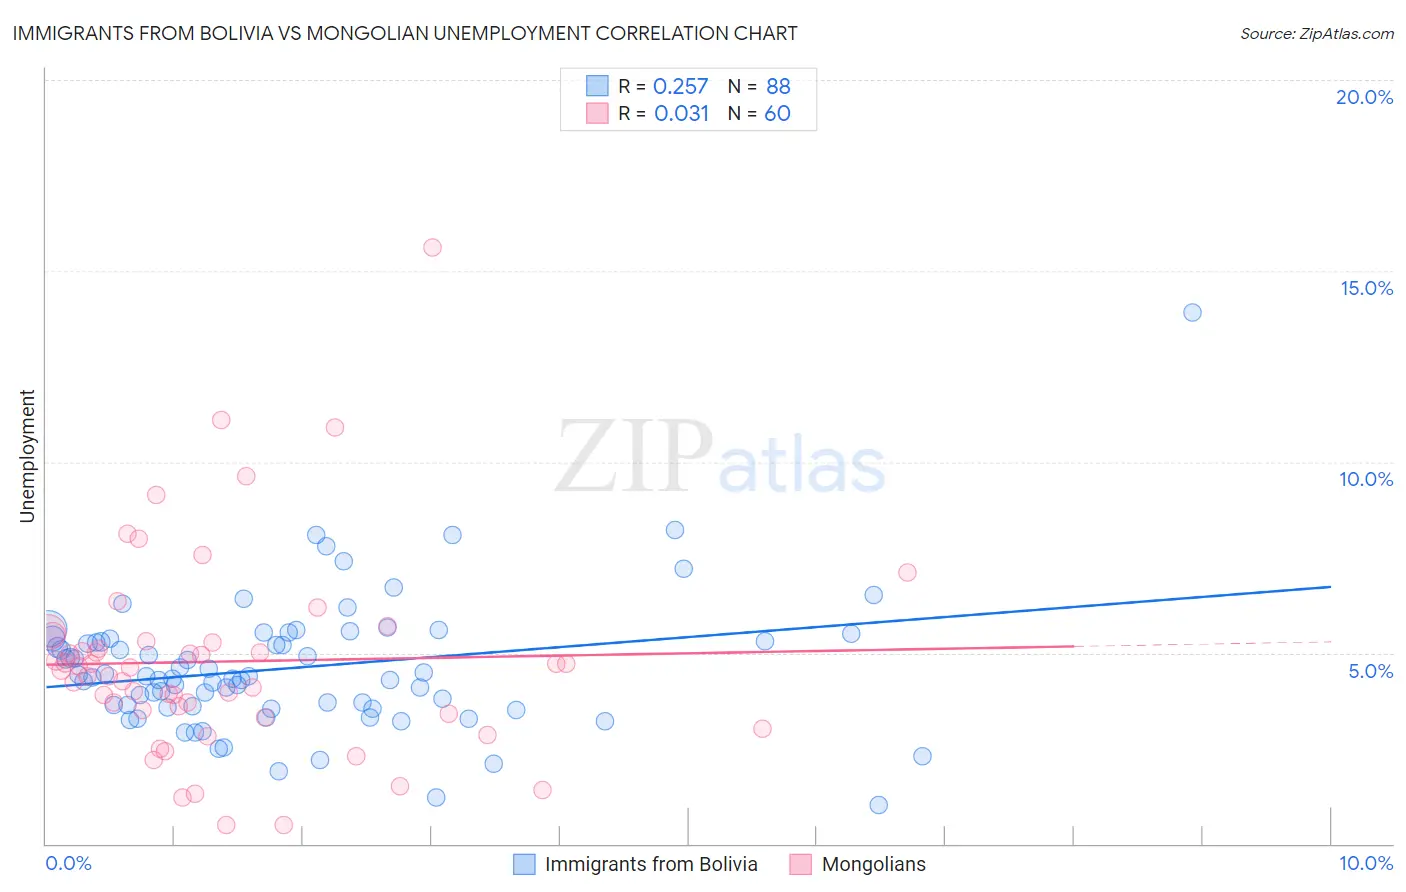 Immigrants from Bolivia vs Mongolian Unemployment